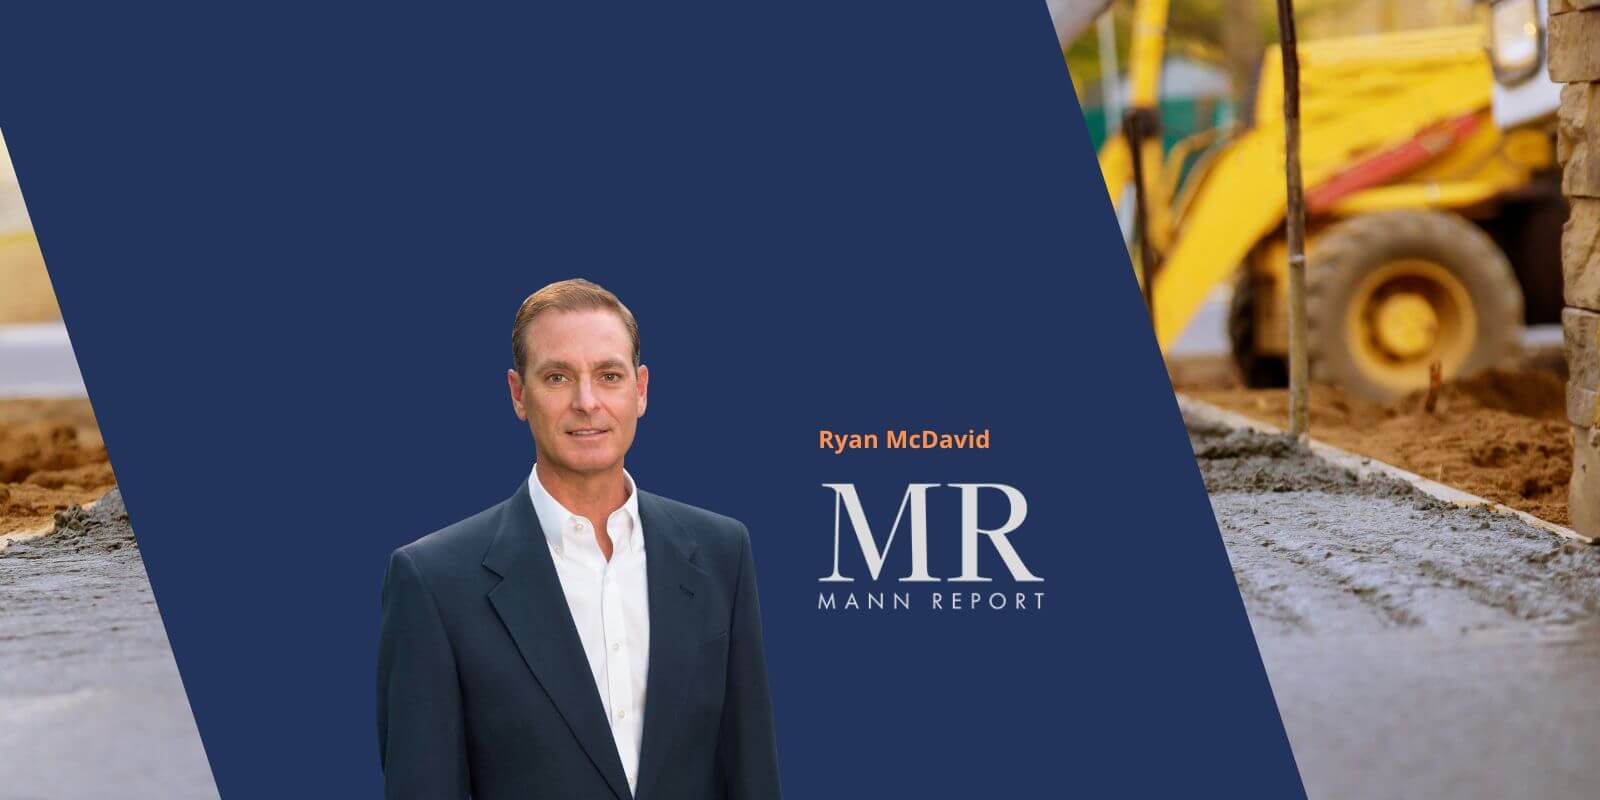 Featured image for “McDavid Joins T&T Construction Management Group”